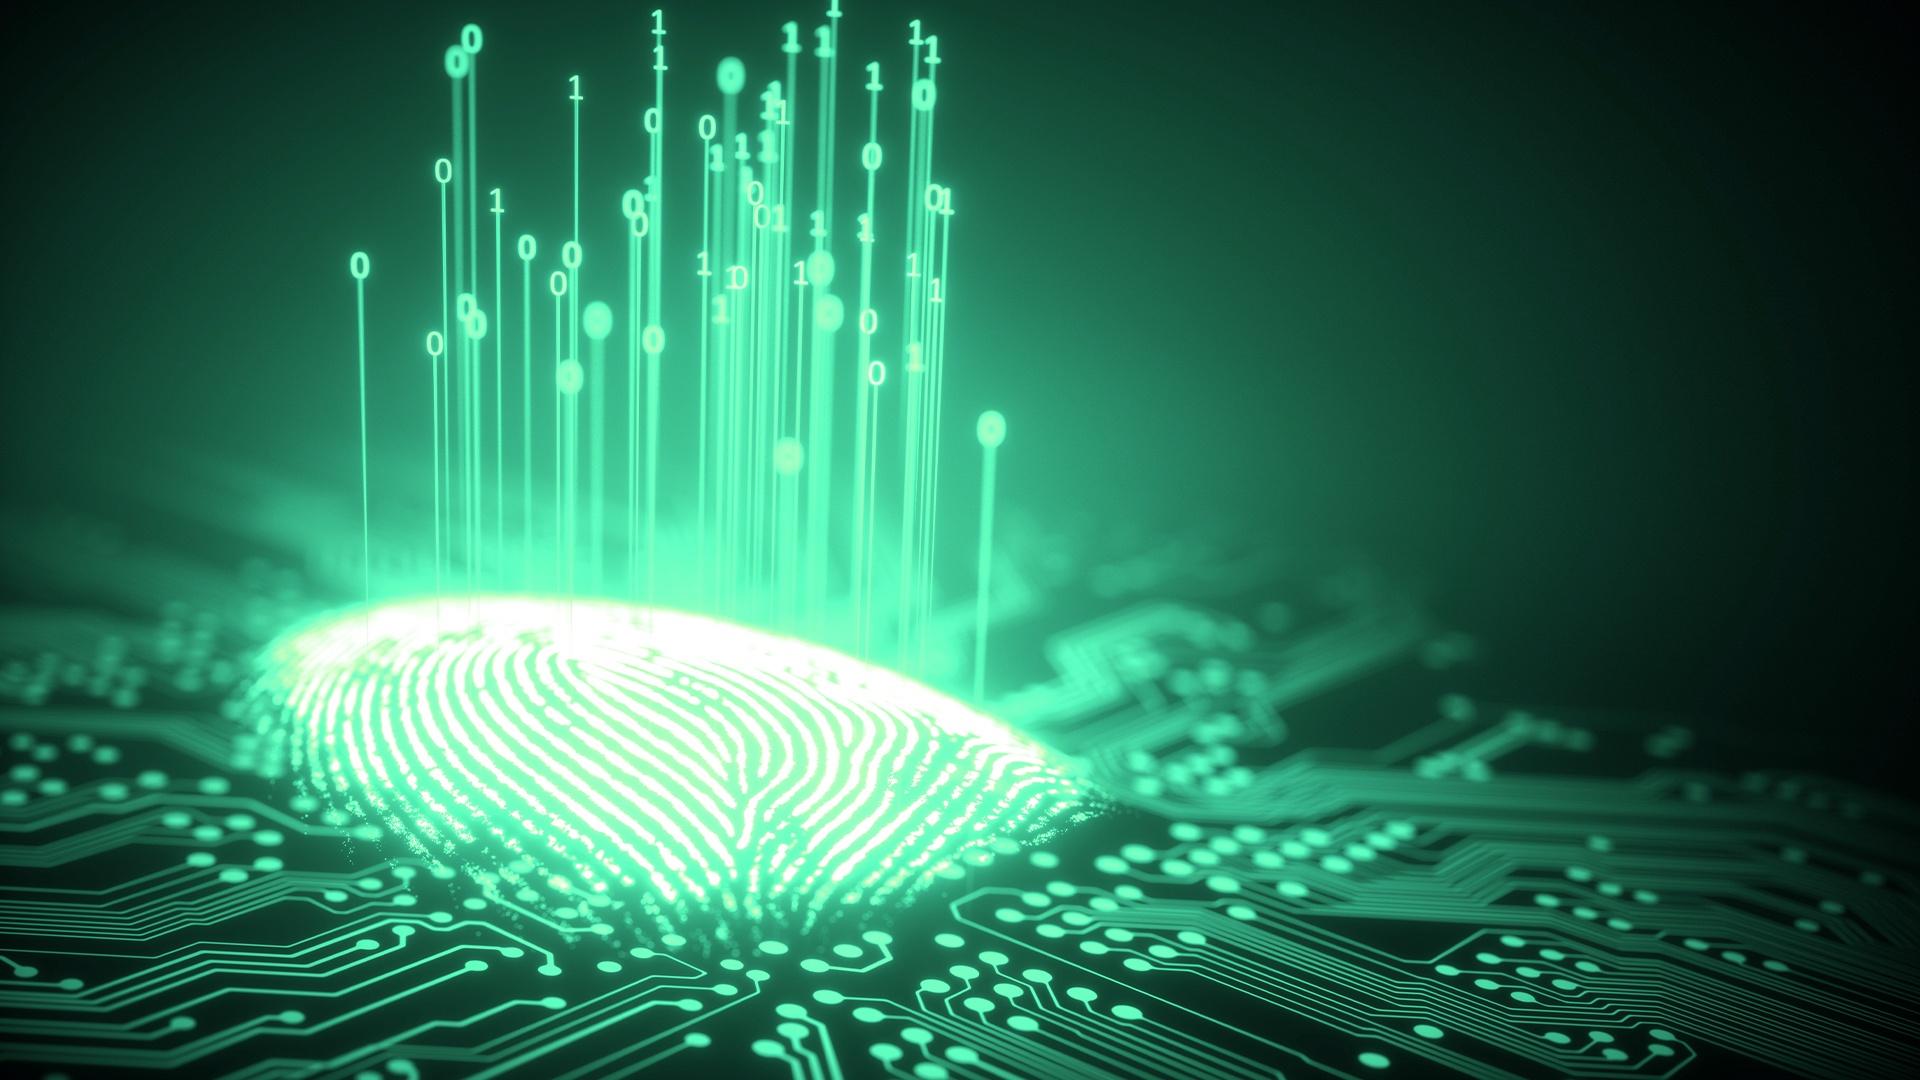 a graphic of a thumbprint with "1"s and "0"s rising from the surface of the print. All is basked in a green glow and on the surface plane of what looks like a circut board